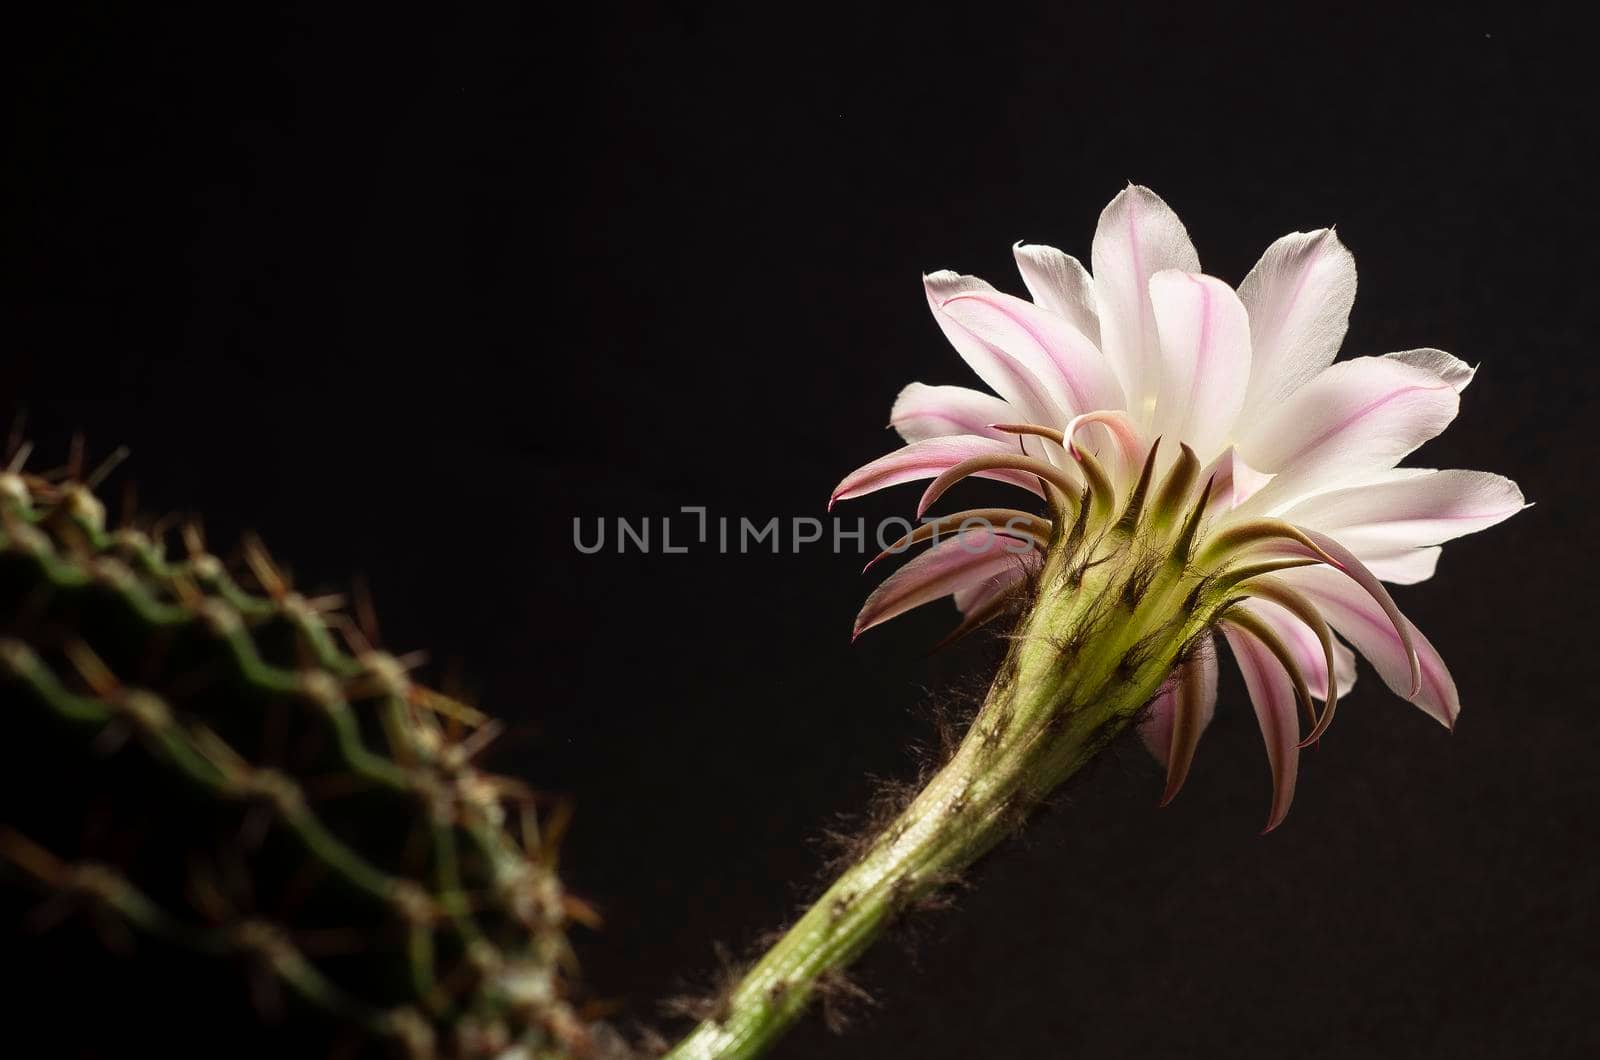 the Beautiful soft pink cactus flower